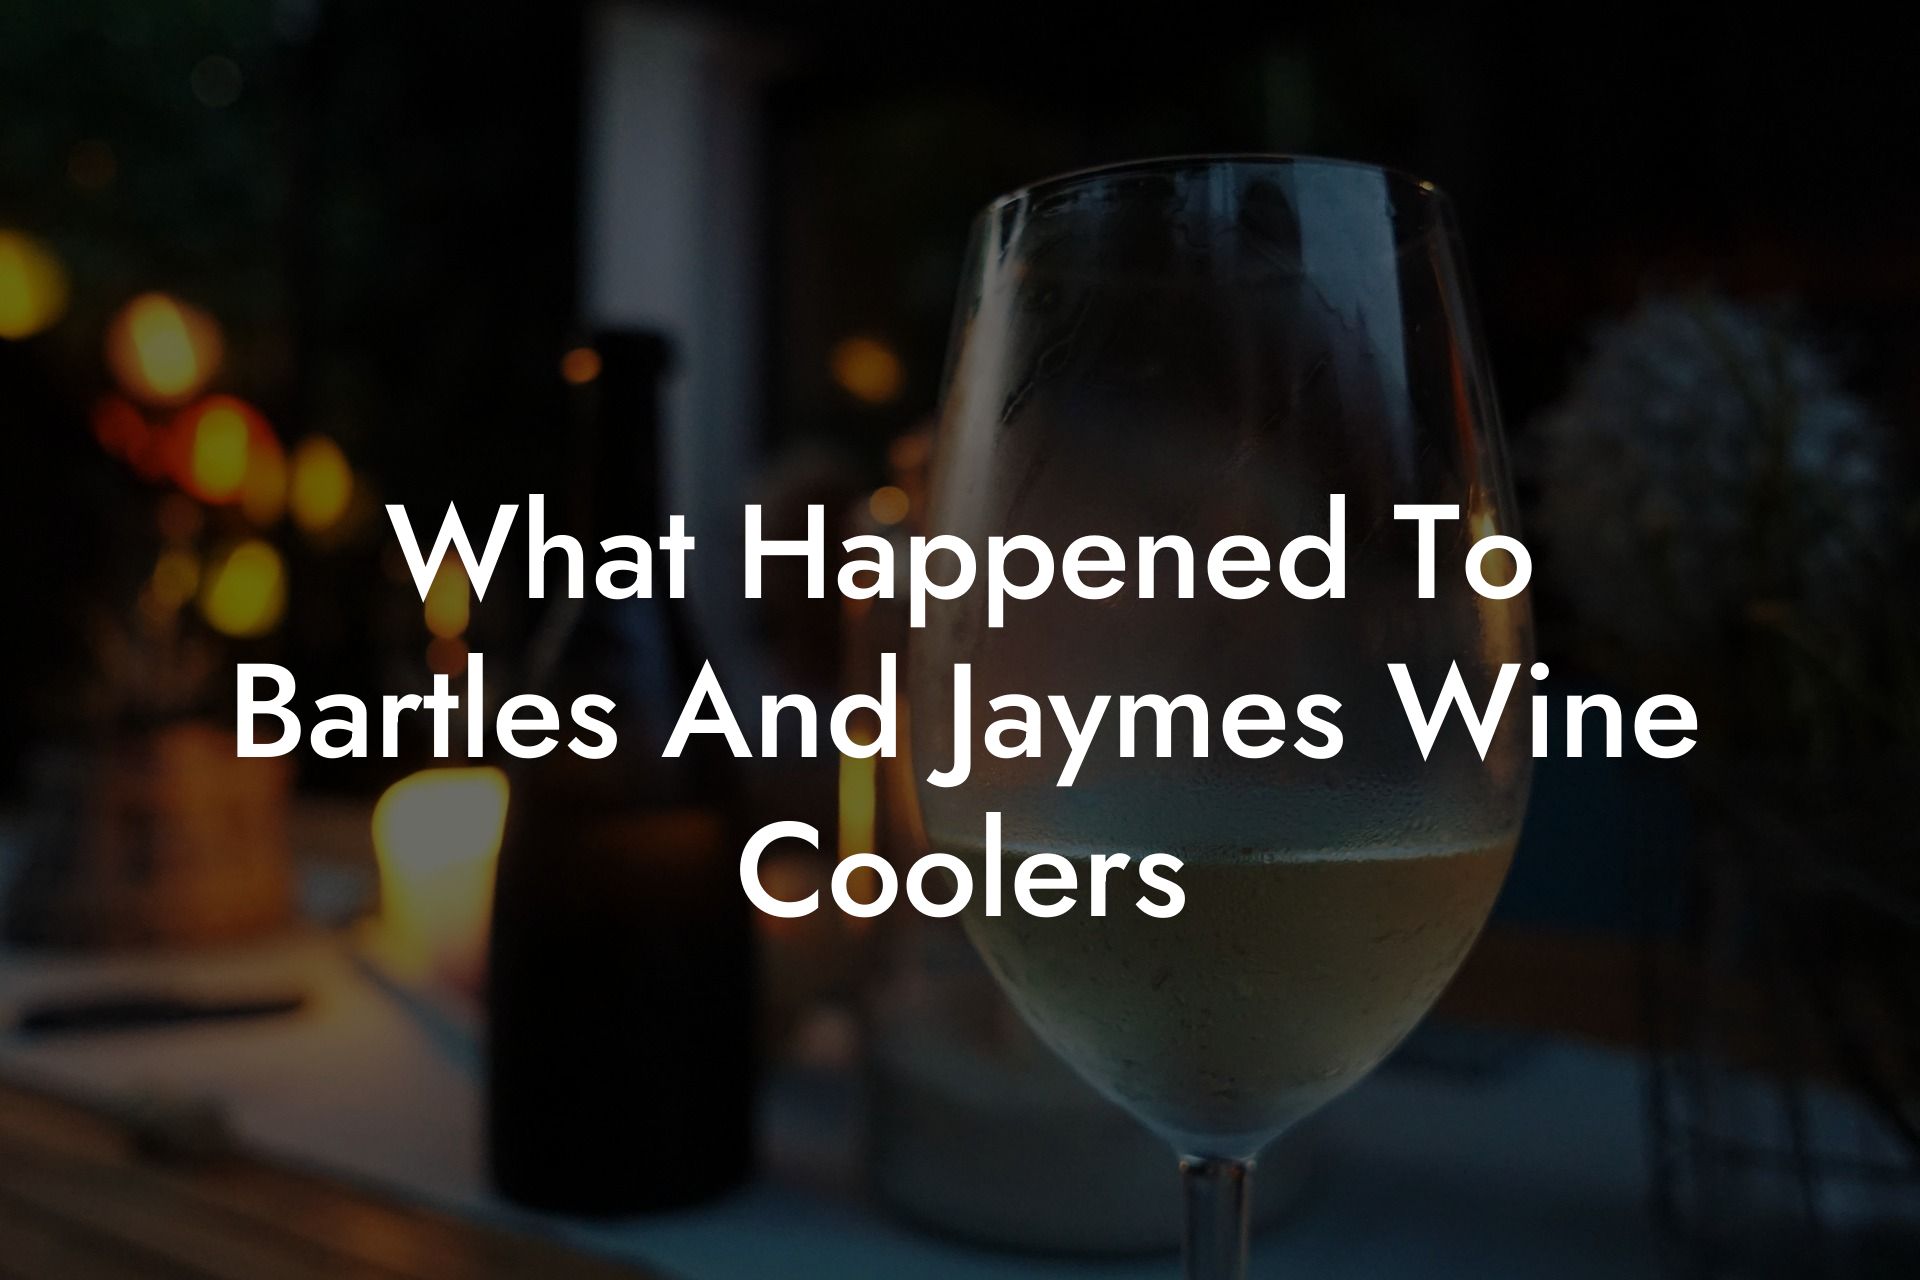 What Happened To Bartles And Jaymes Wine Coolers